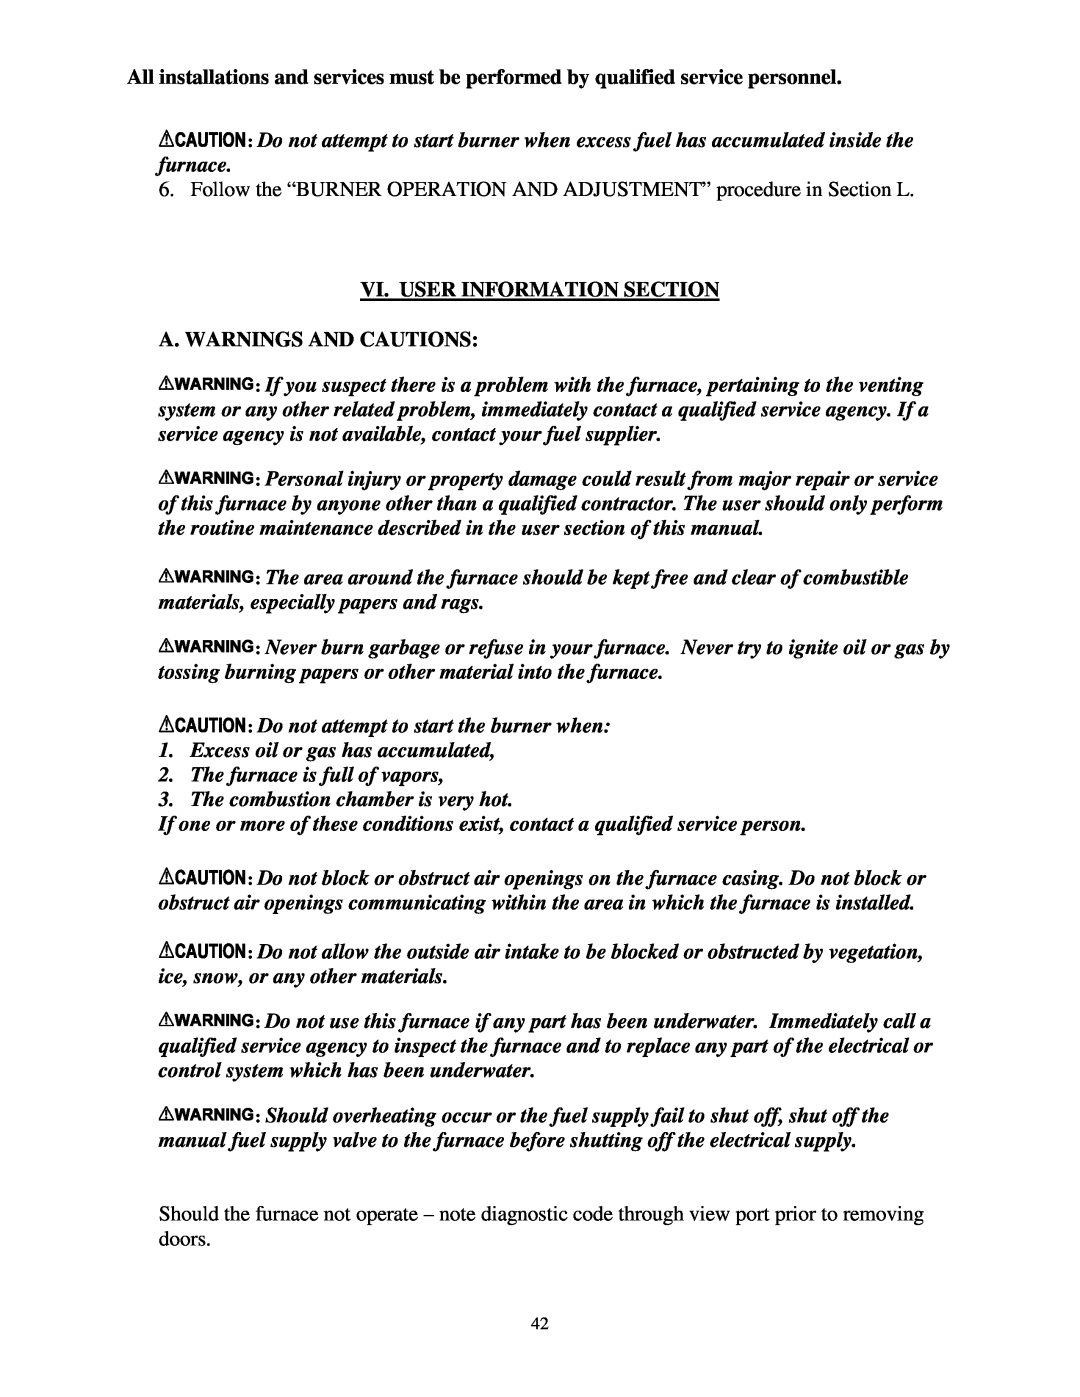 Thermo Products ome-72d36 service manual Vi. User Information Section, A. Warnings And Cautions 